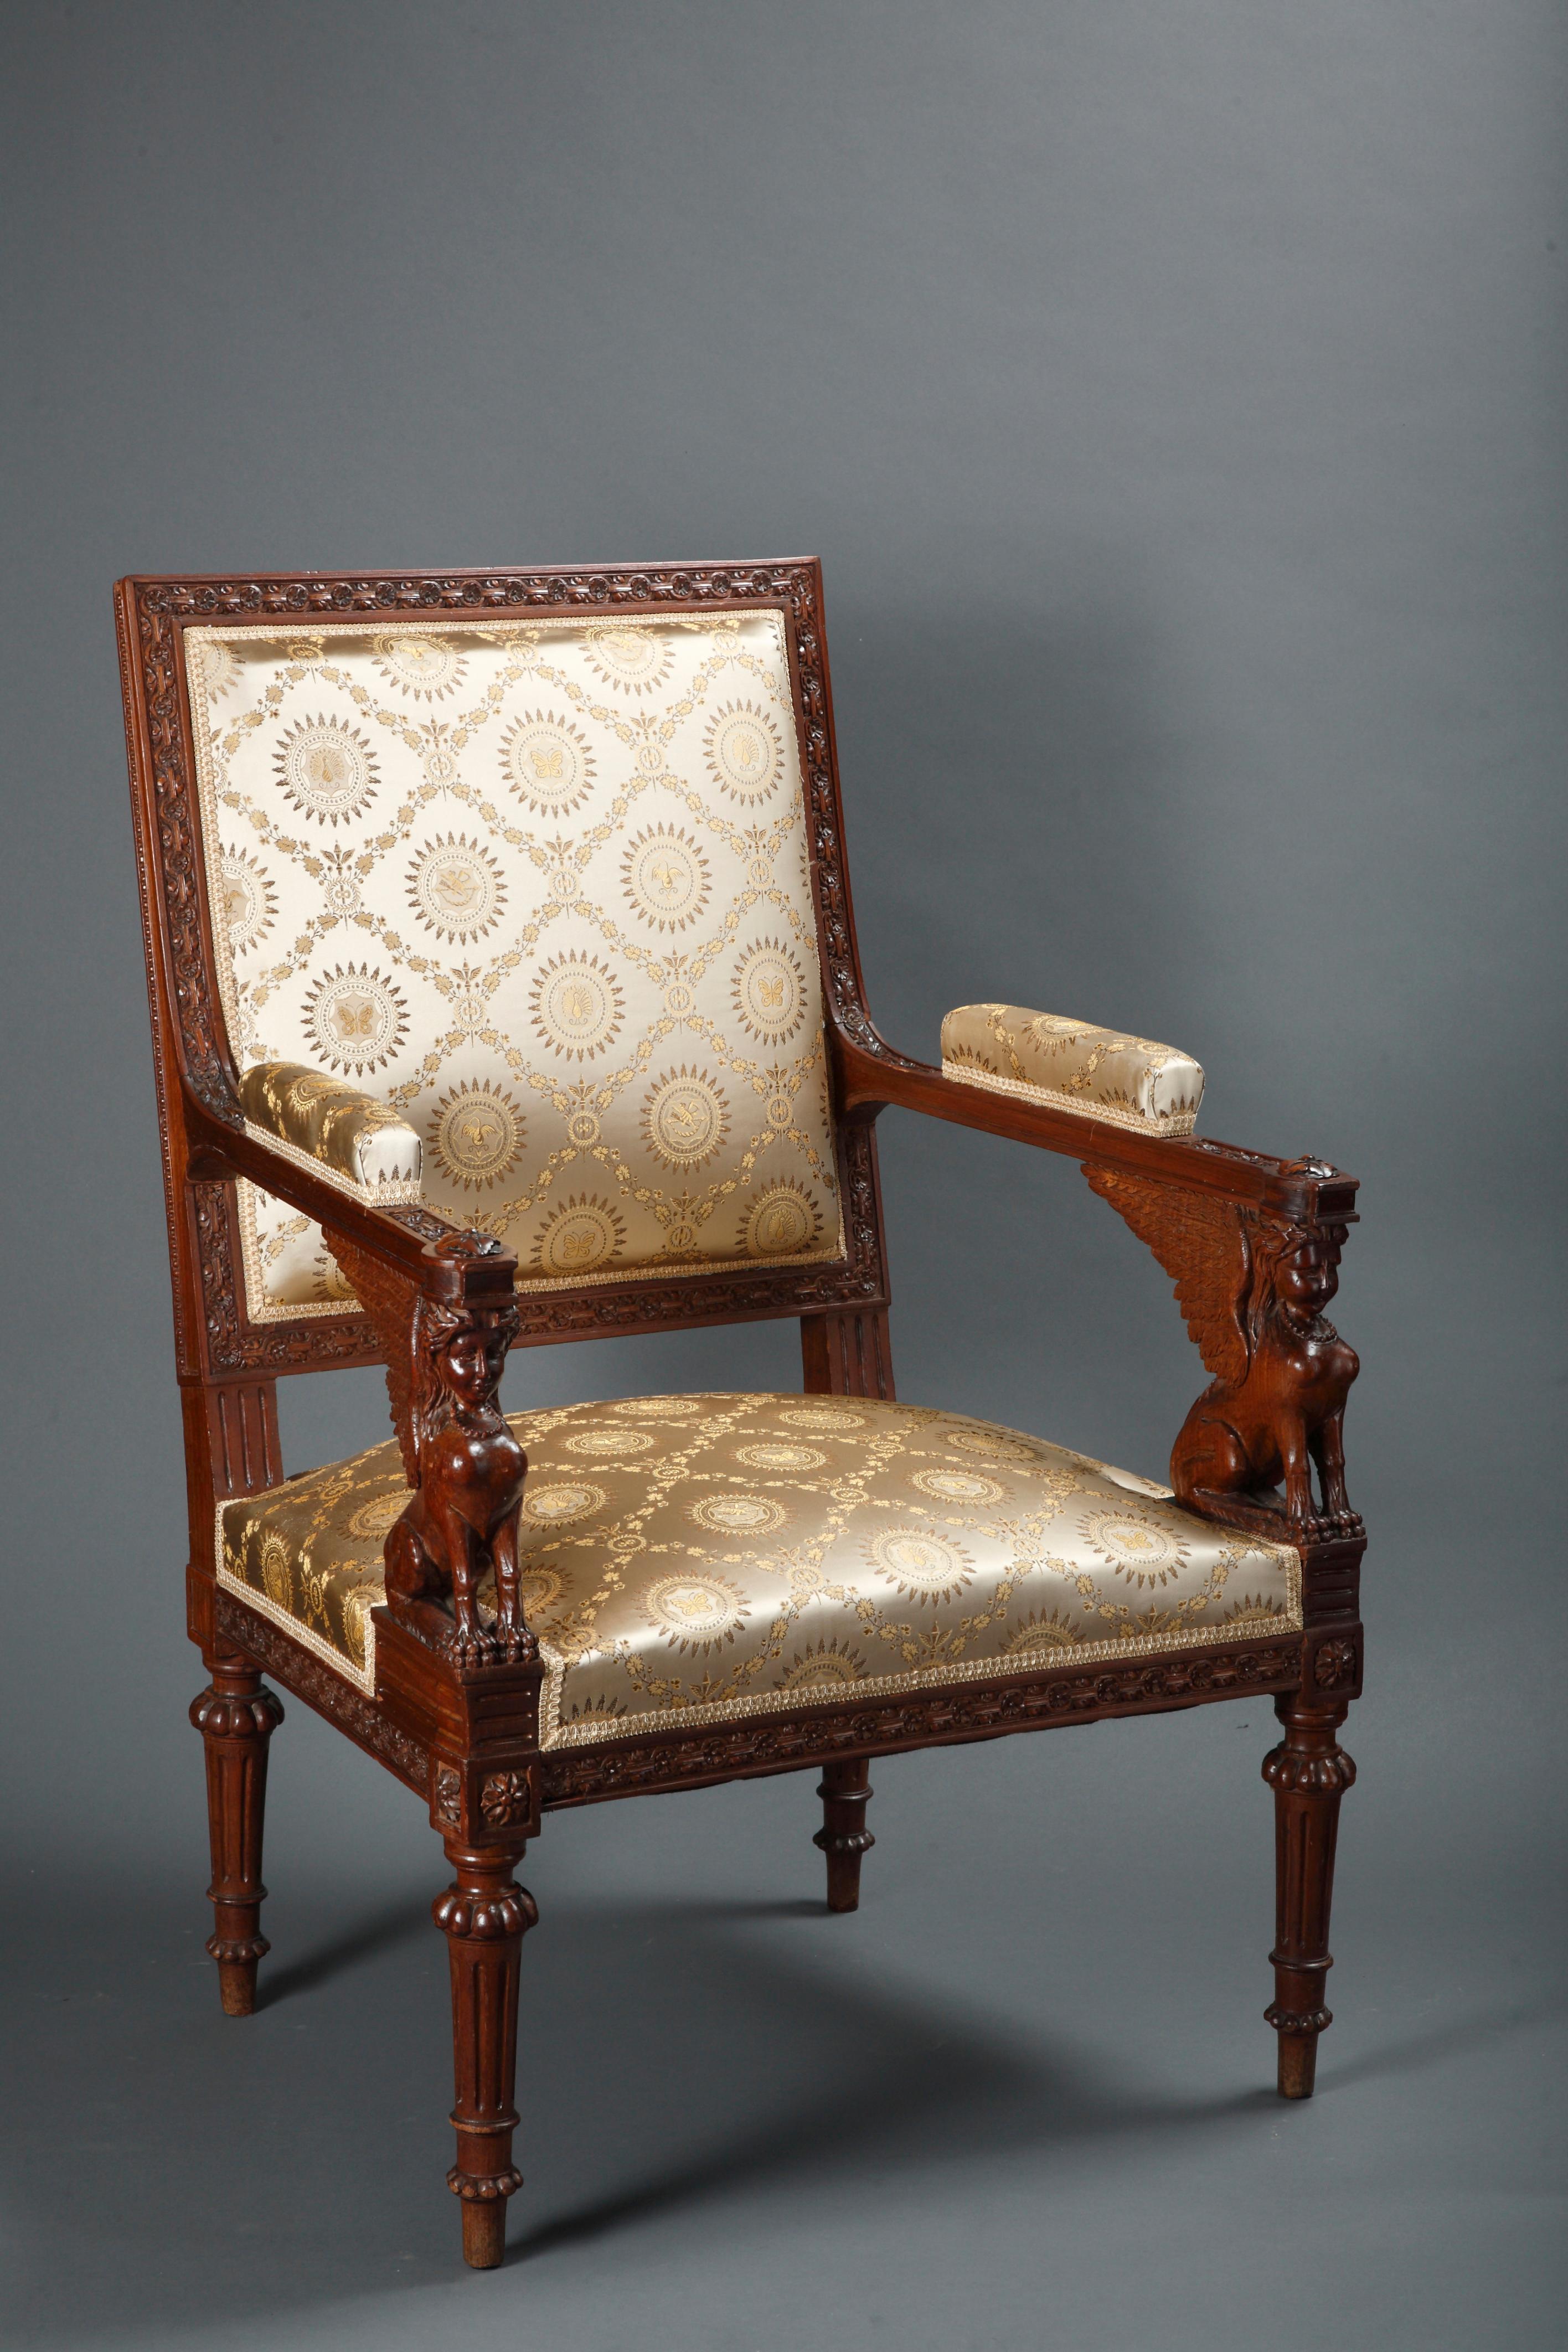 A very fine pair of carved and tinted wood armchairs after G. Jacob, with carved sphinges for the armrest supports. The circumference of the seatback and the seat belt are delicately carved with beads, rosettes and links. Reposing on tapered and